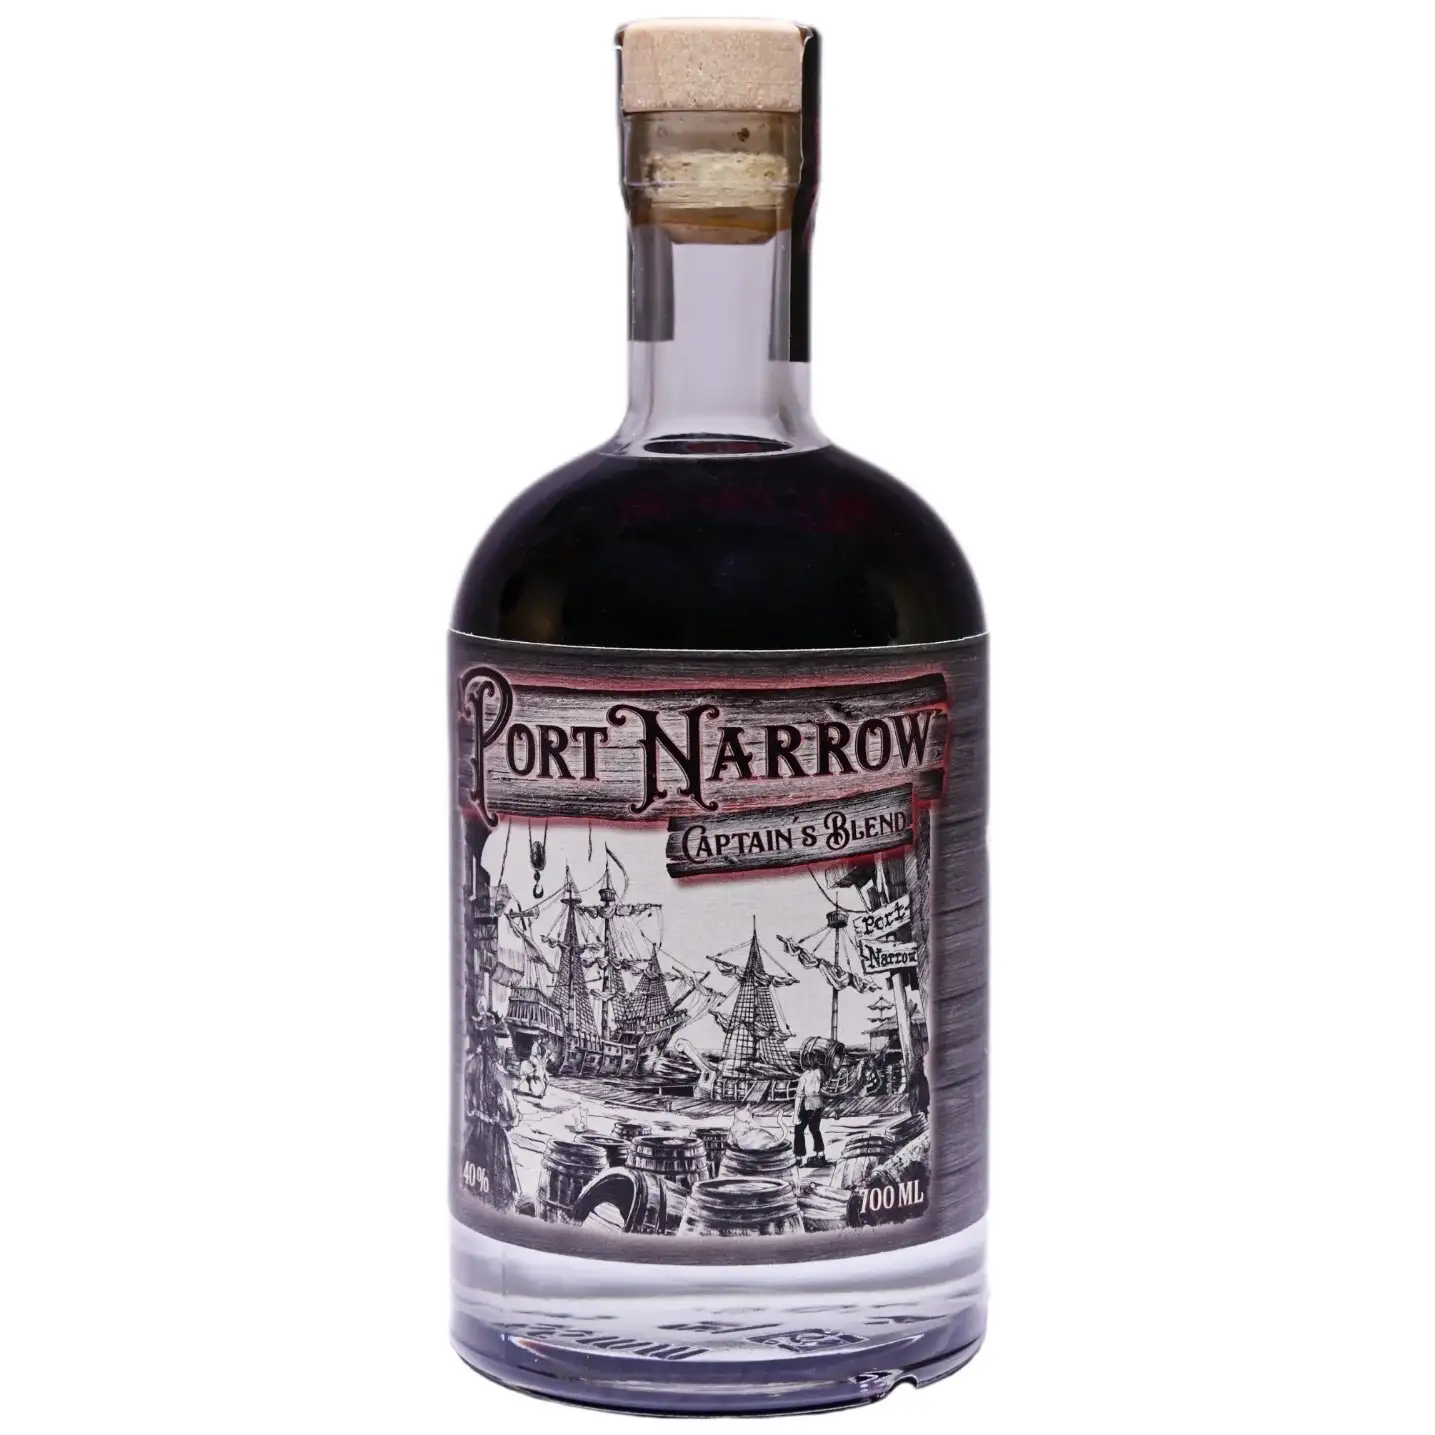 Image of the front of the bottle of the rum Port Narrow Captain's Blend